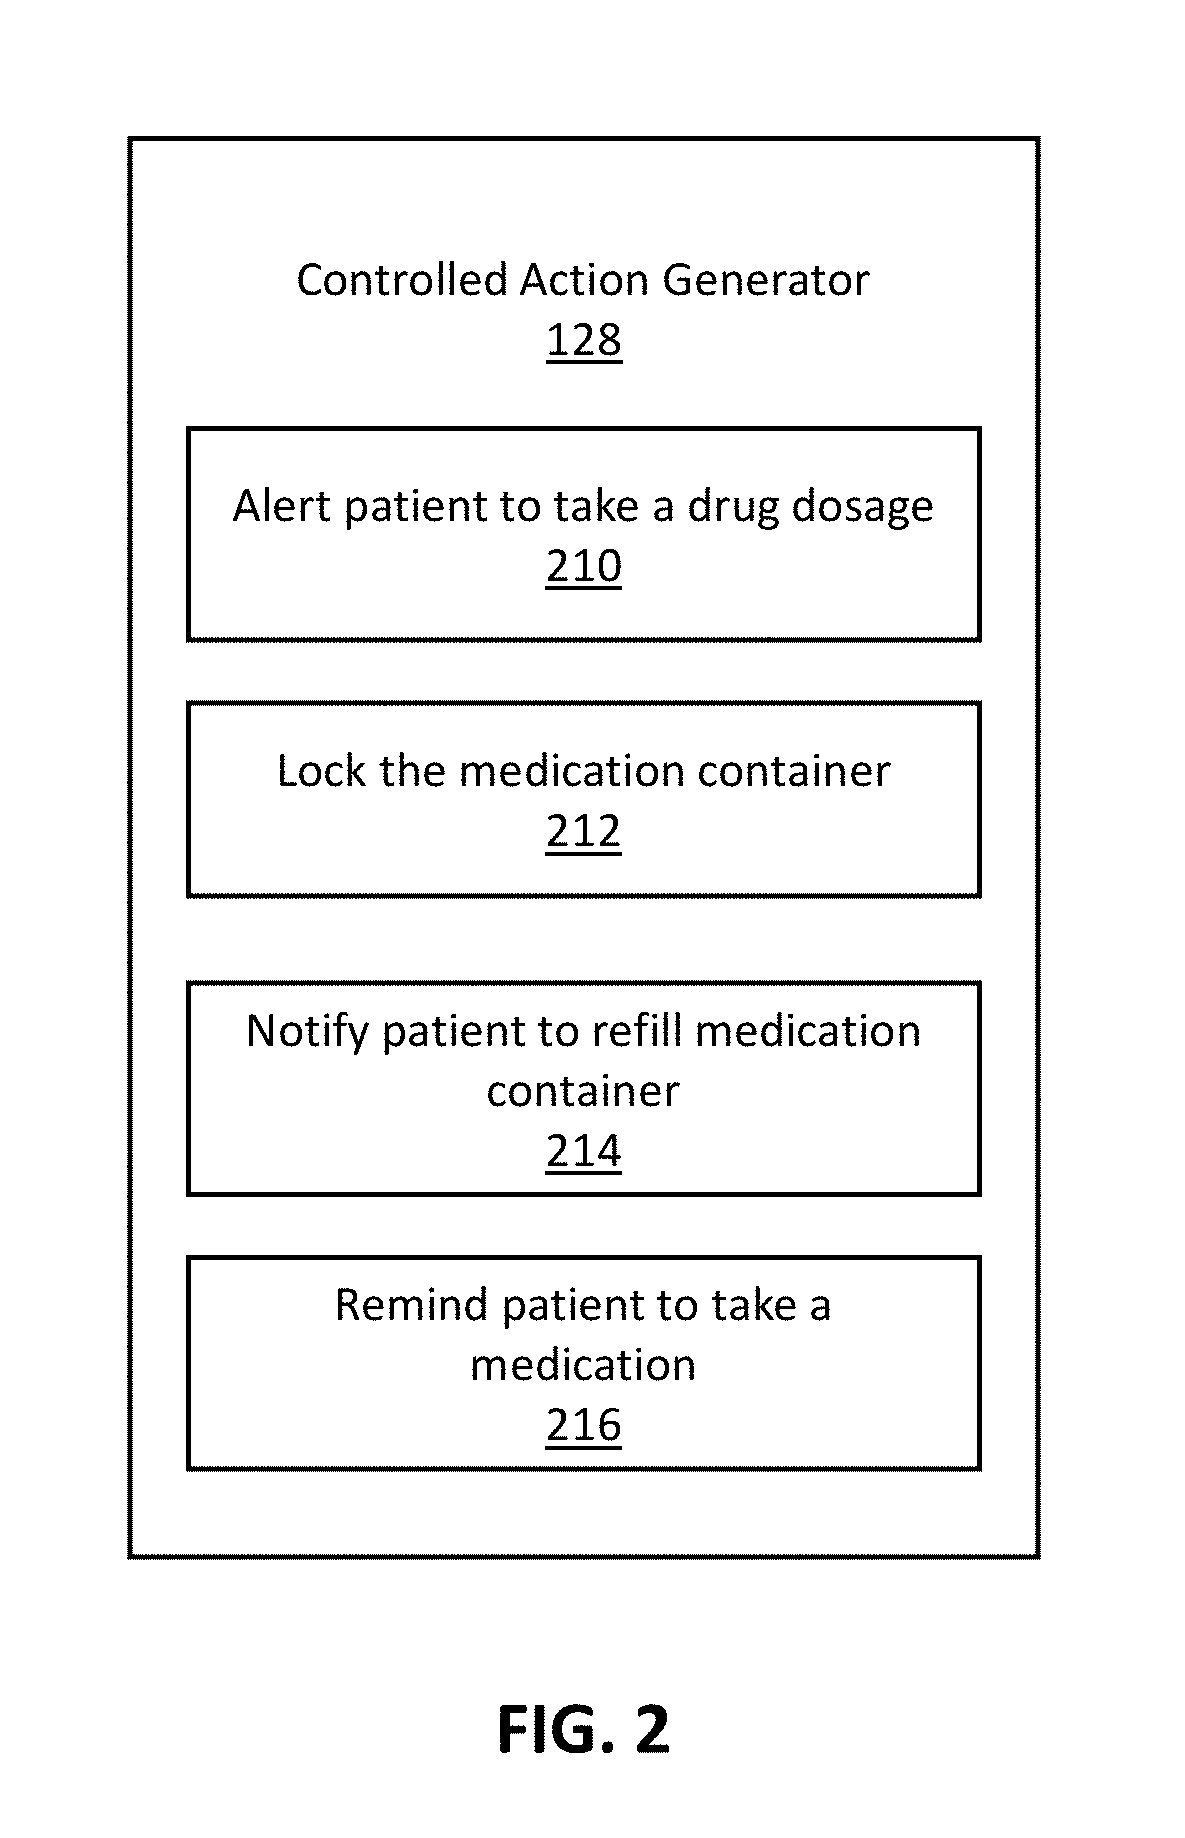 Cognitive medication containers providing targeted medication assistance